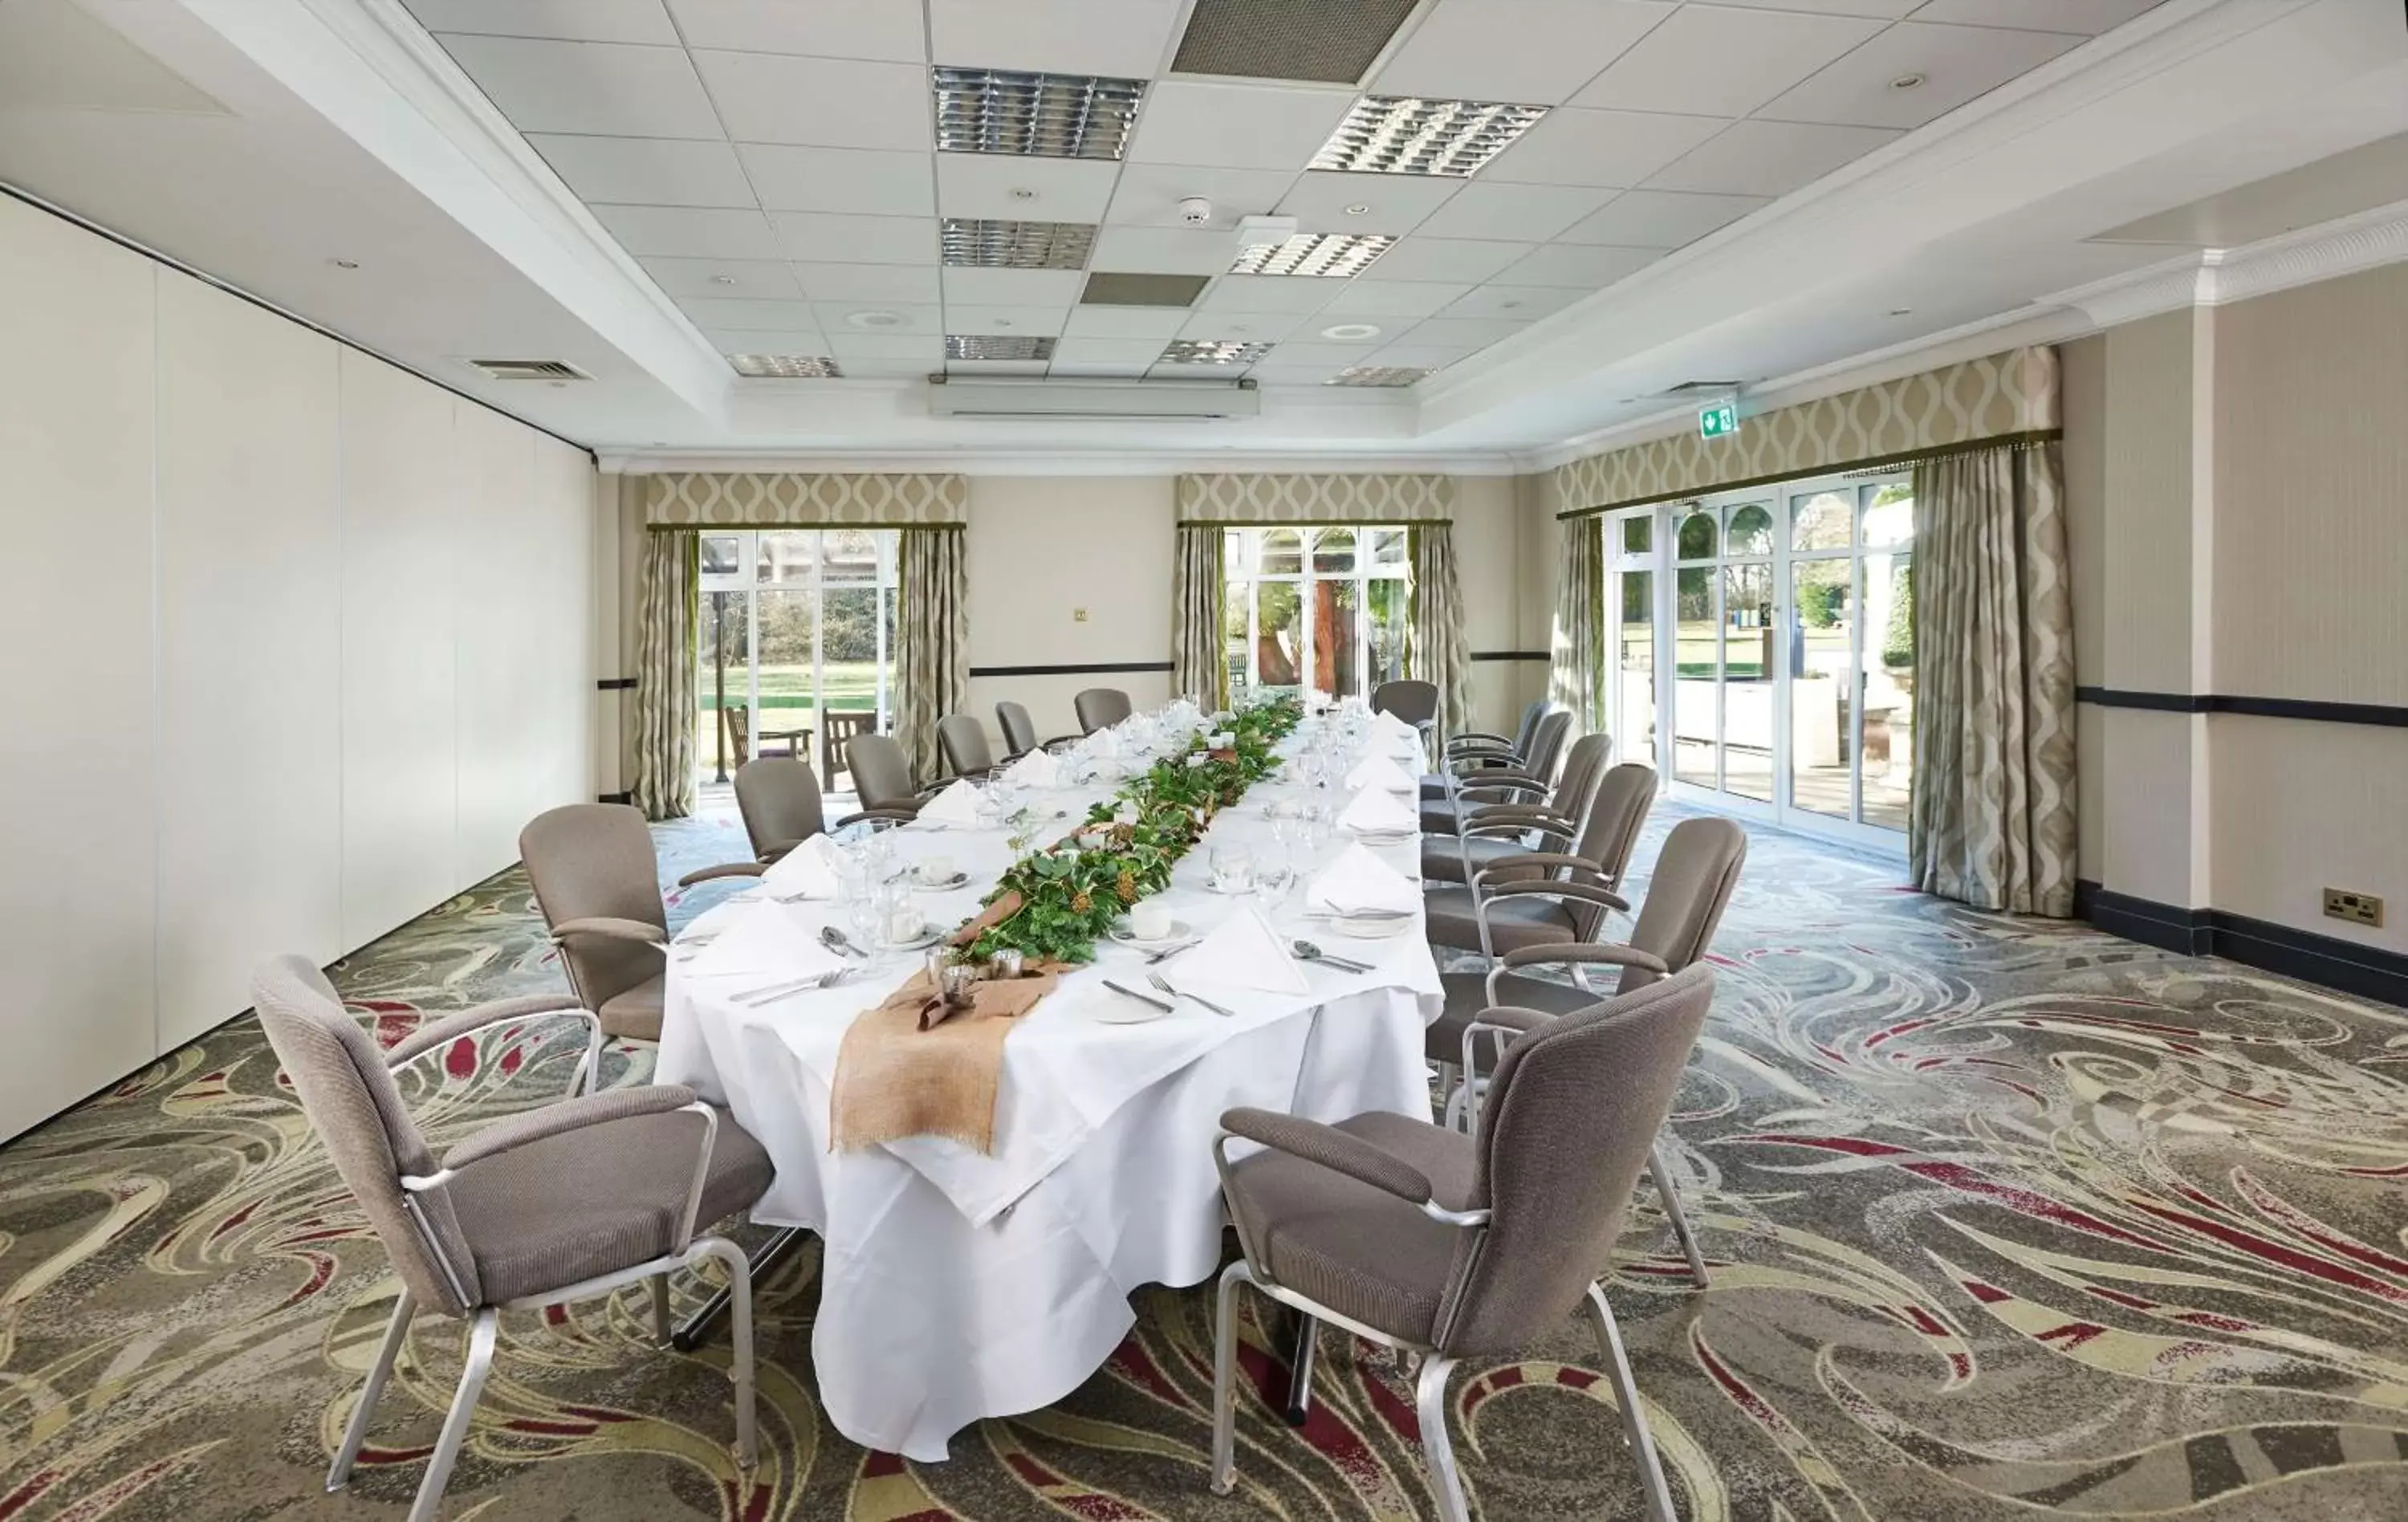 Meeting/conference room in DoubleTree by Hilton St. Anne's Manor